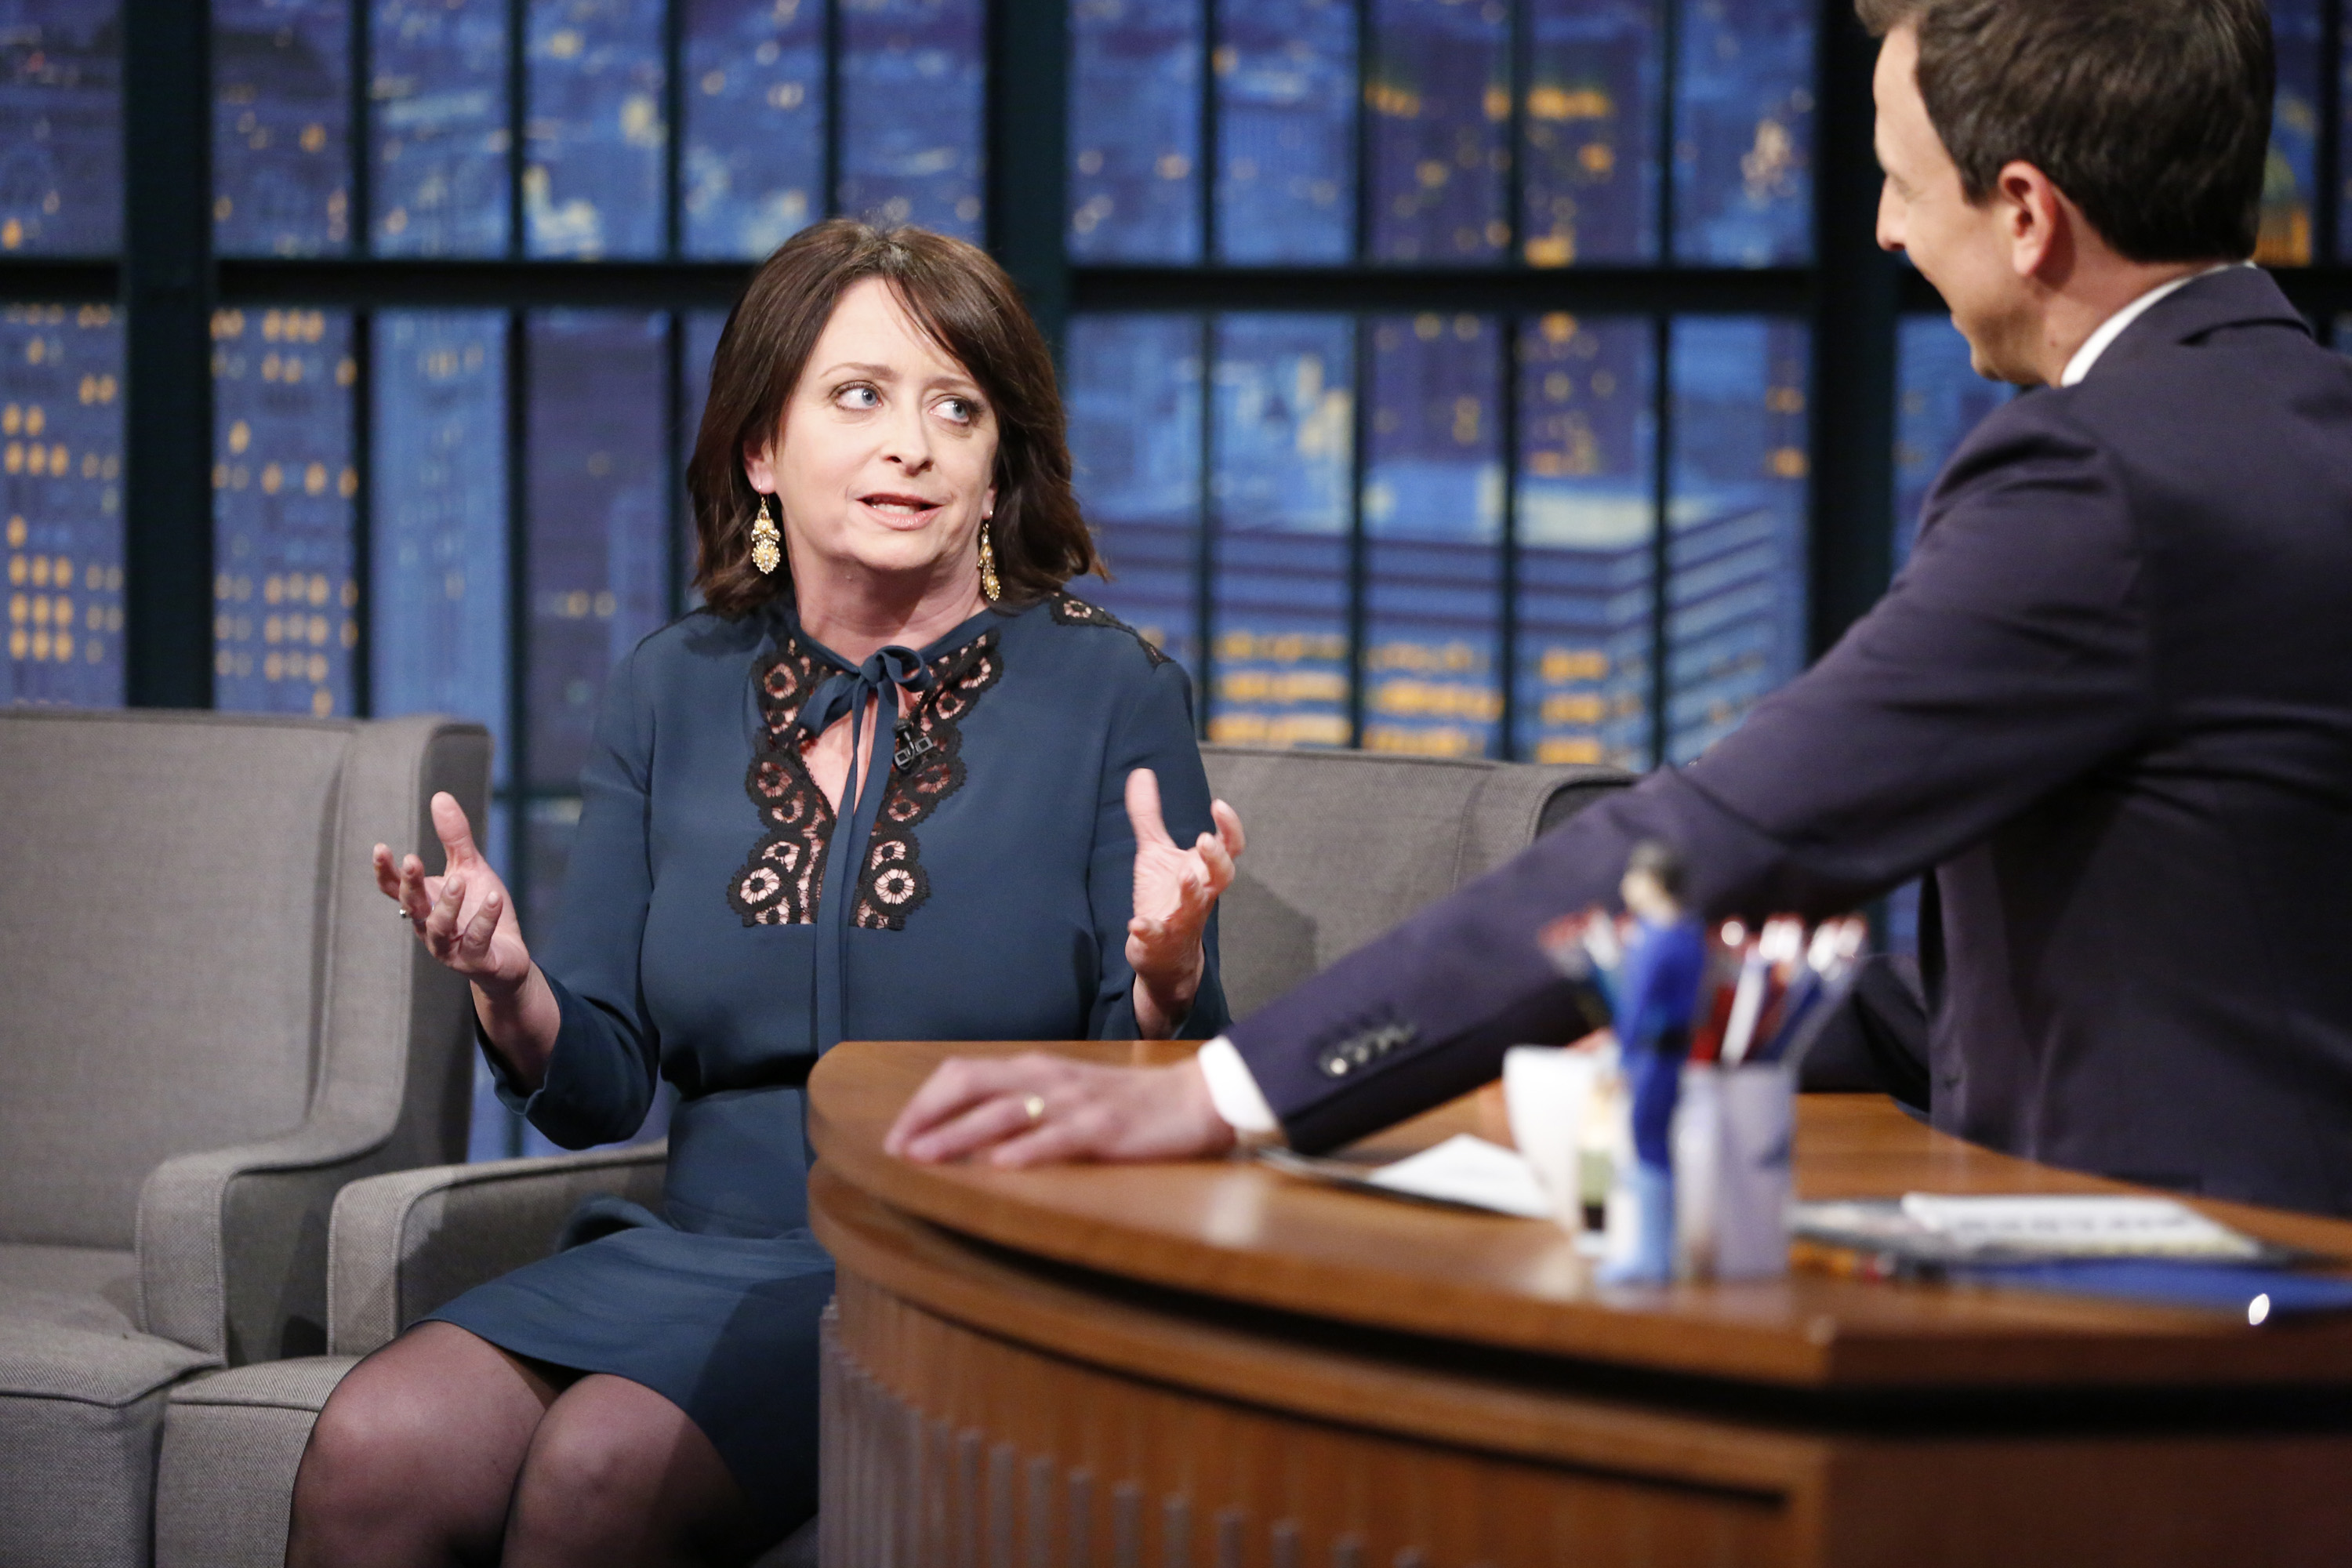 LATE NIGHT WITH SETH MEYERS -- Episode 277 -- Pictured: (l-r) Comedian Rachel Dratch during an interview with host Seth Meyers on October 26, 2015 -- (Photo by: Lloyd Bishop/NBC)